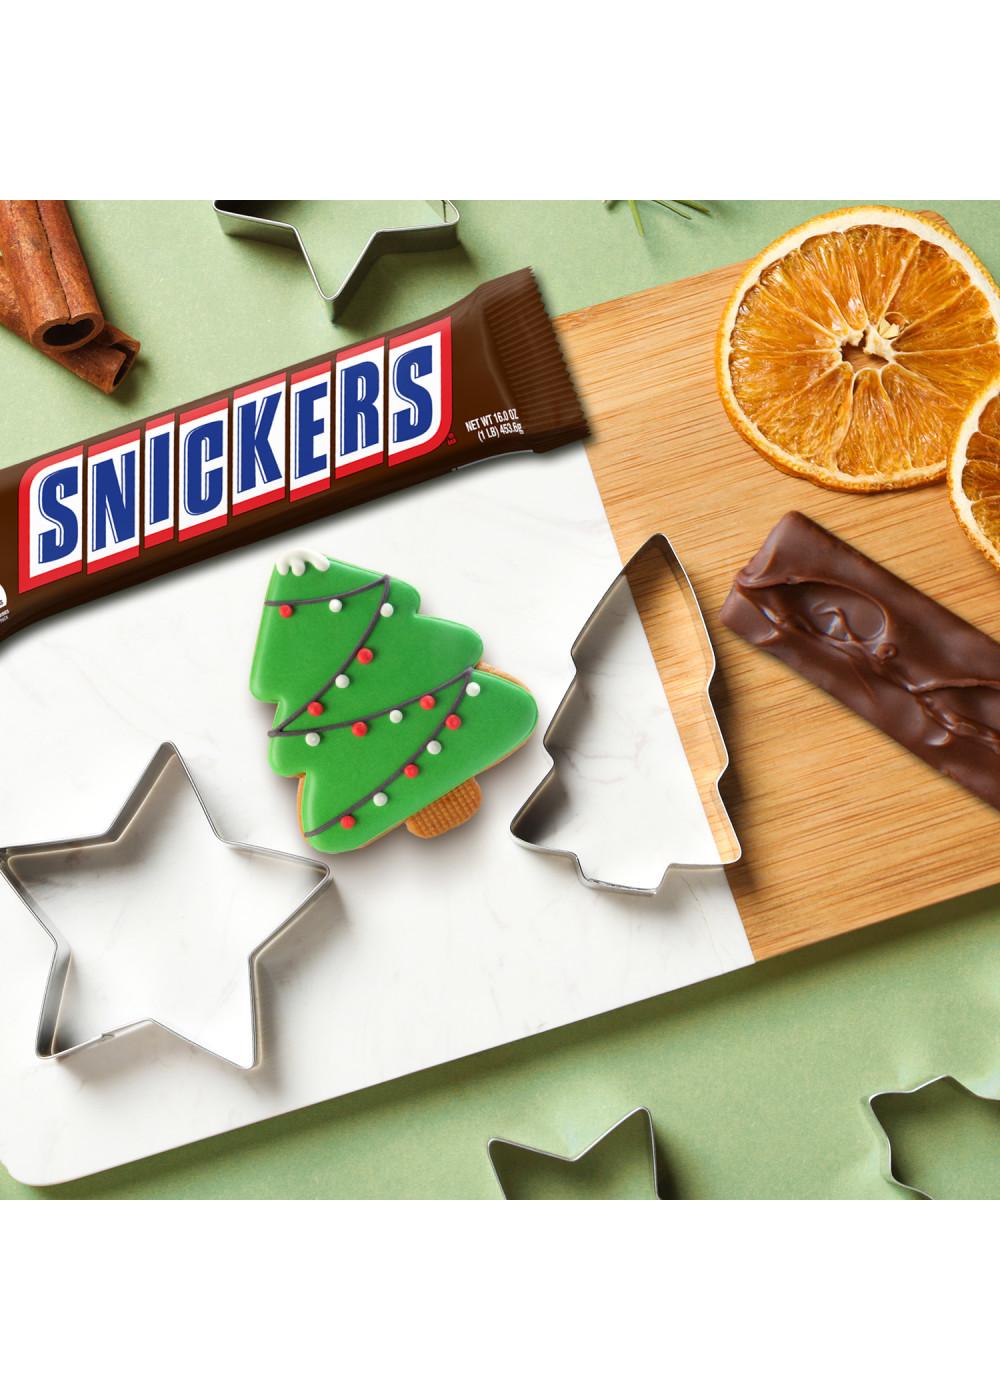 Snickers Chocolate Slice N' Share Holiday Candy Bar - Giant Size; image 5 of 7